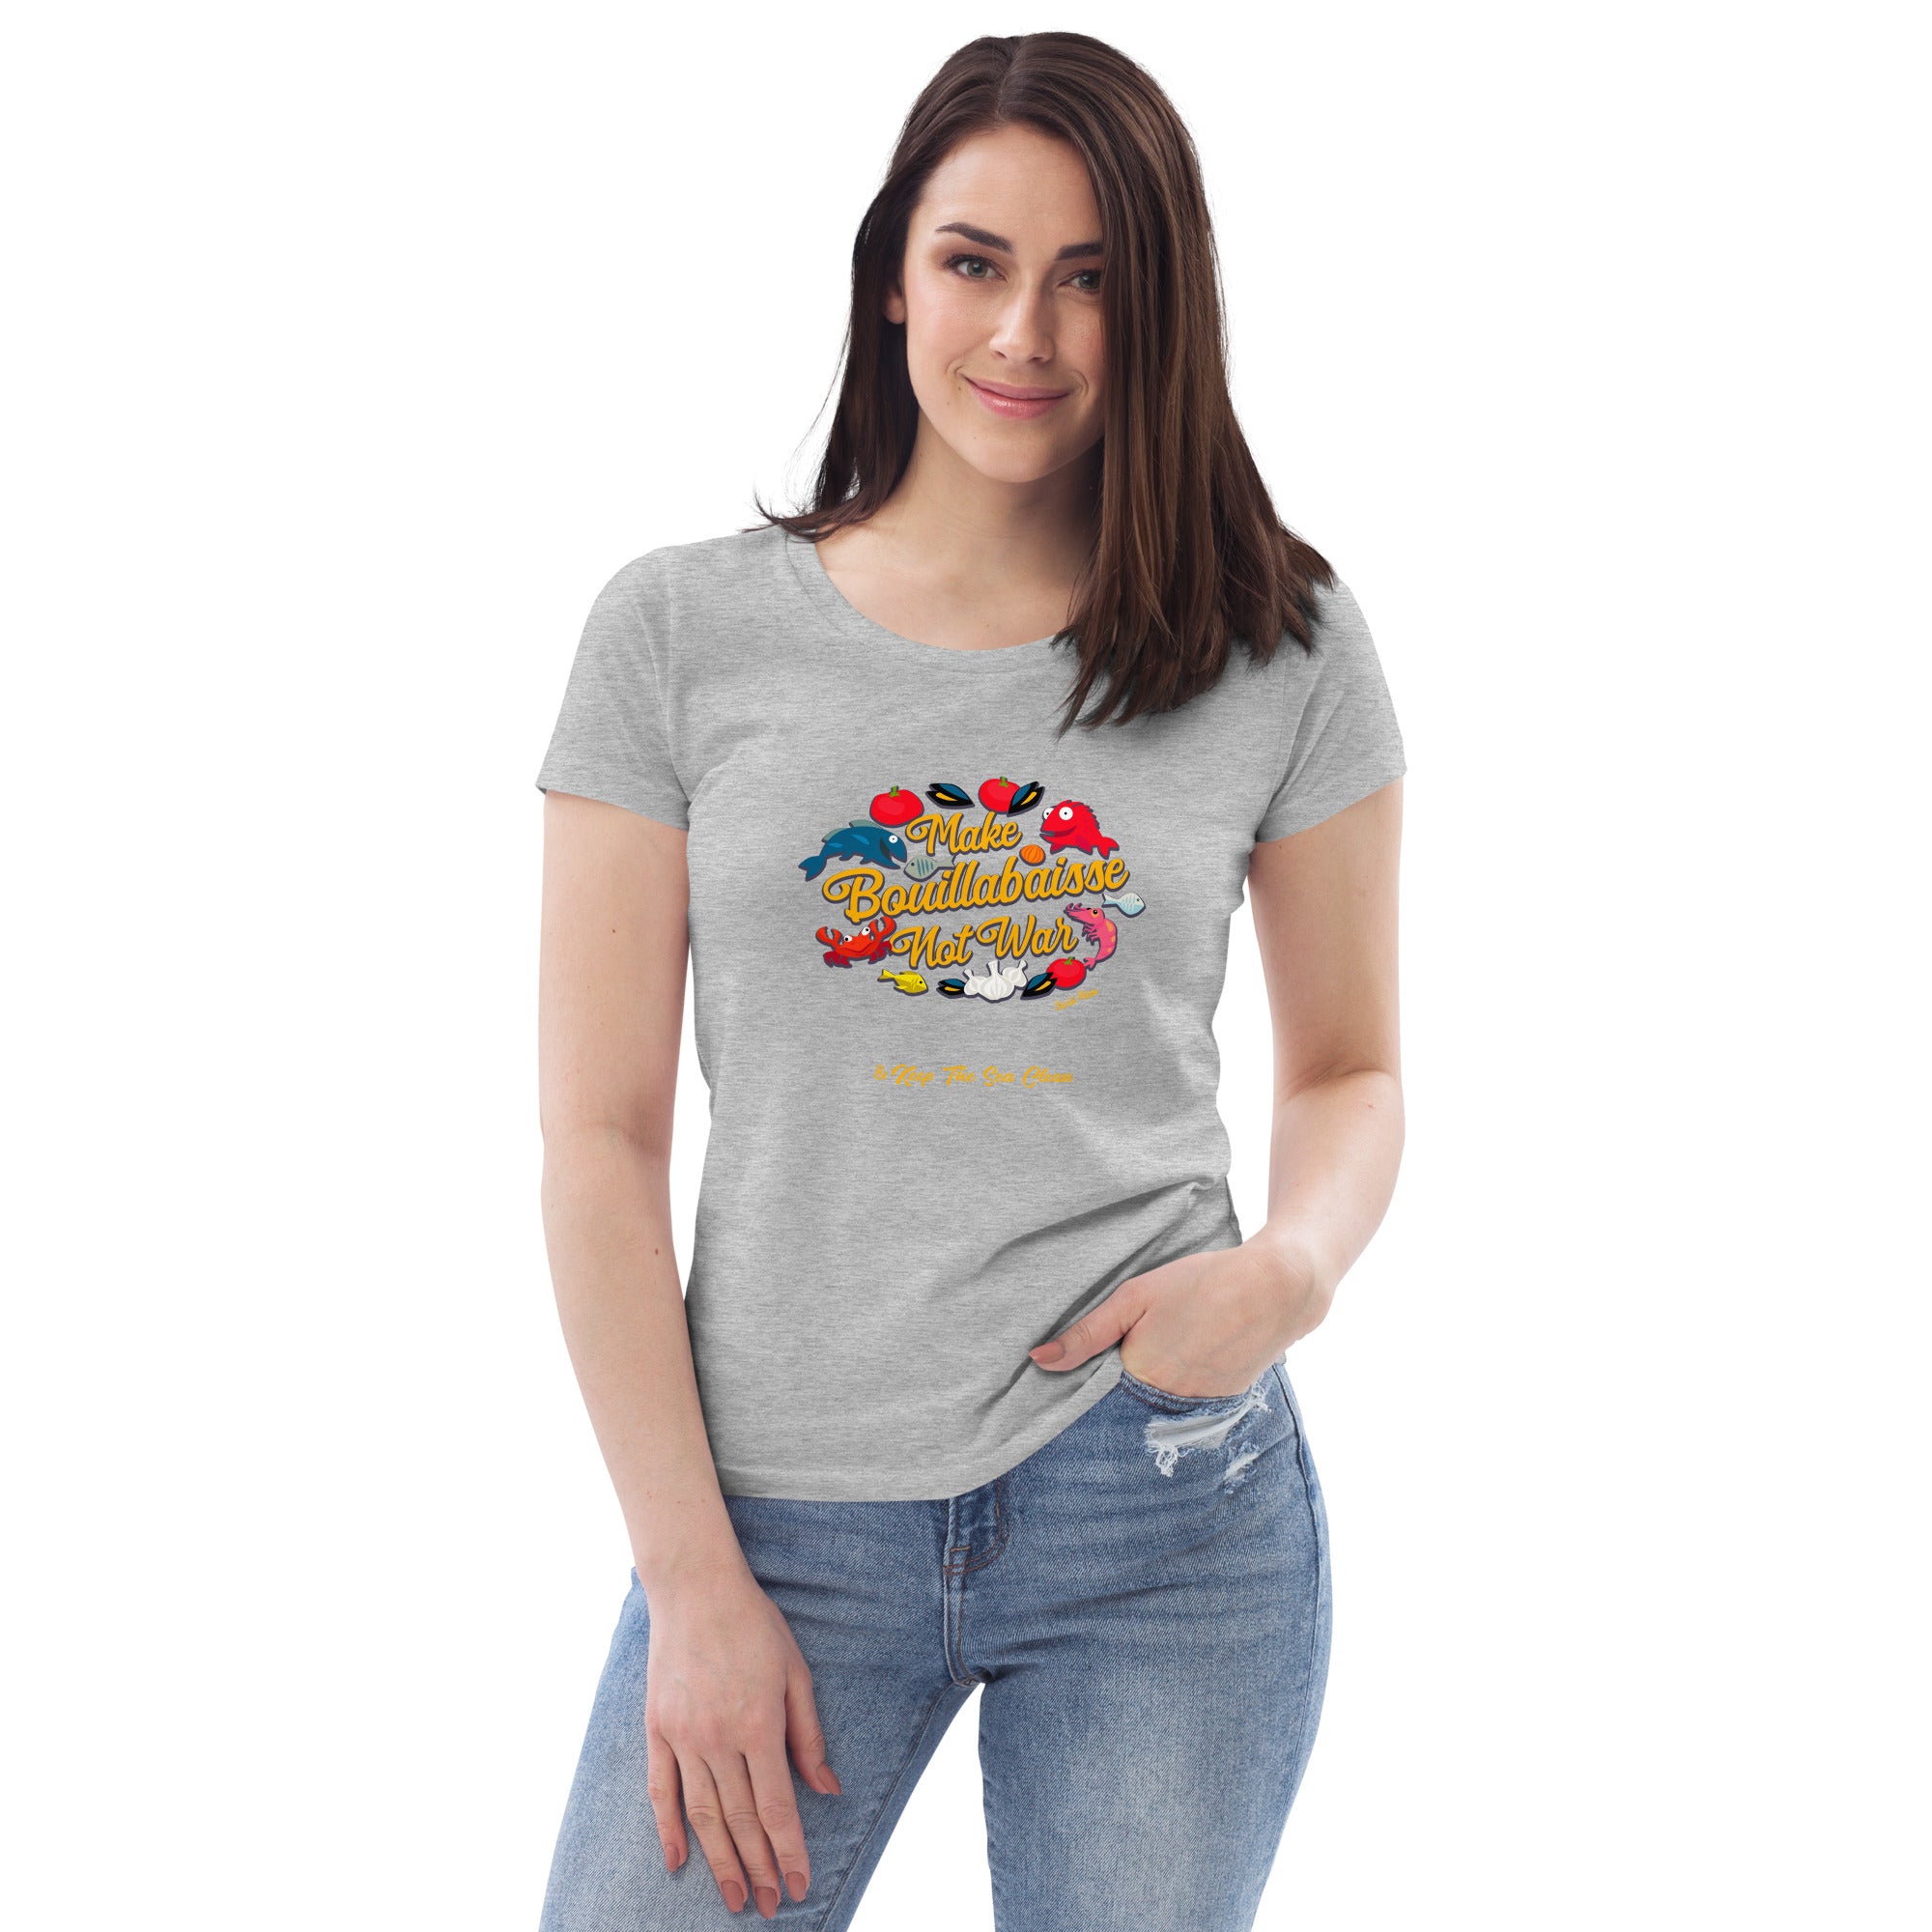 Women's fitted eco tee Make Bouillabaisse Not War & Keep the Sea Clean